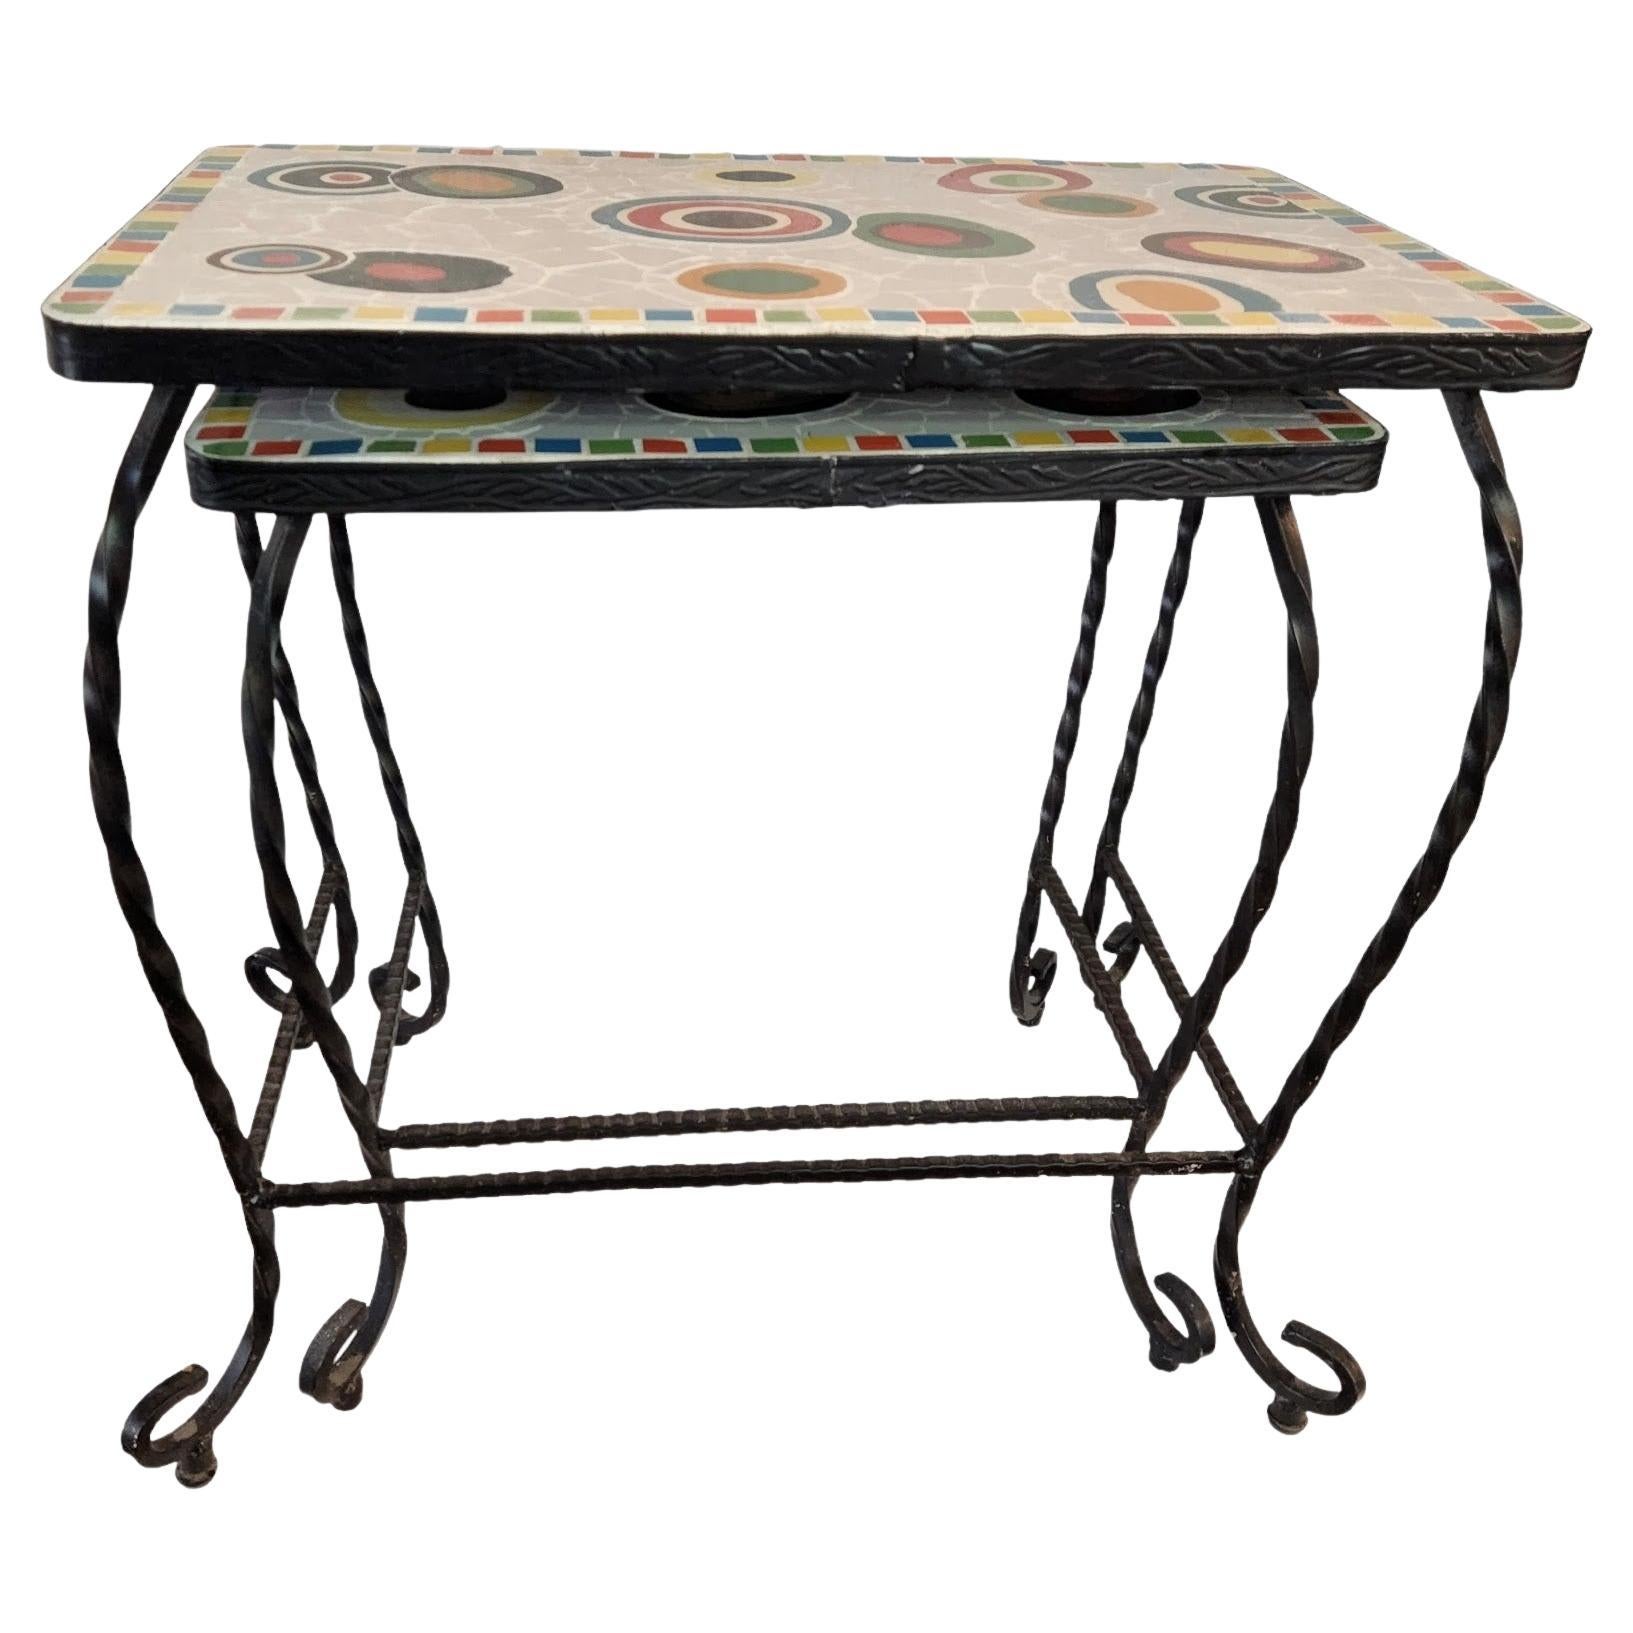 Pair of Twisted Wrought Iron Ceramic Mosaic Side Tables, Italy, 1960 For Sale